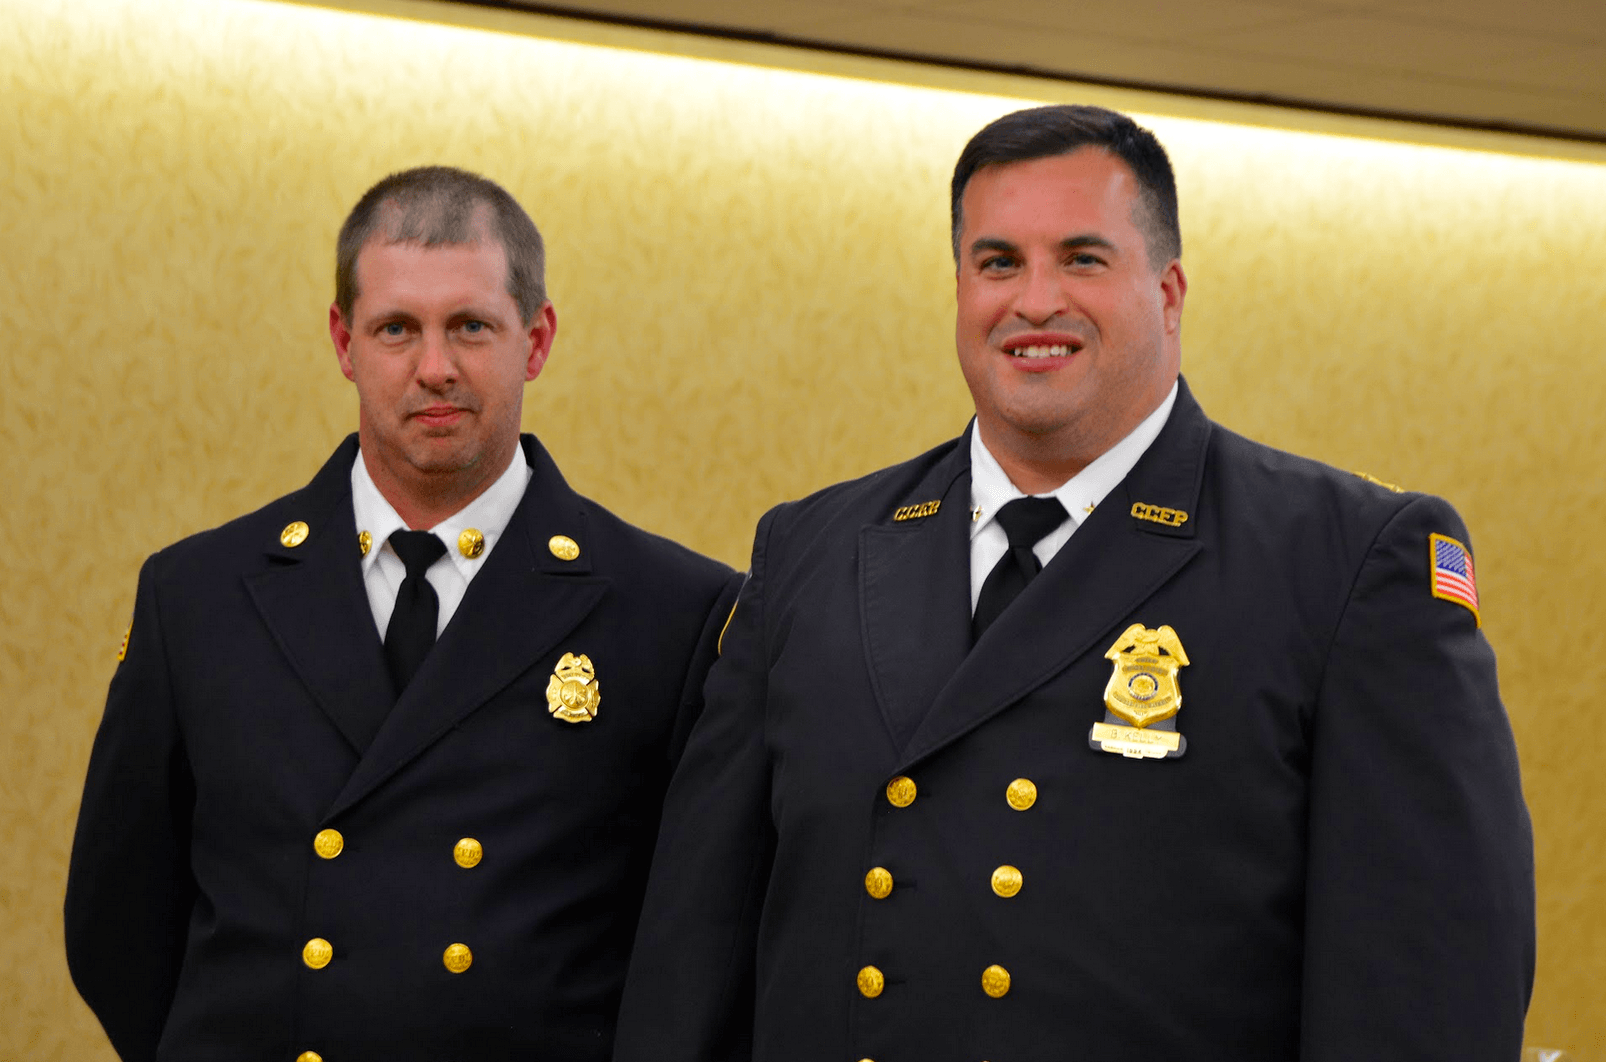 PHOTOS: Greenwich Fire Dept Volunteers Feted at Awards ...